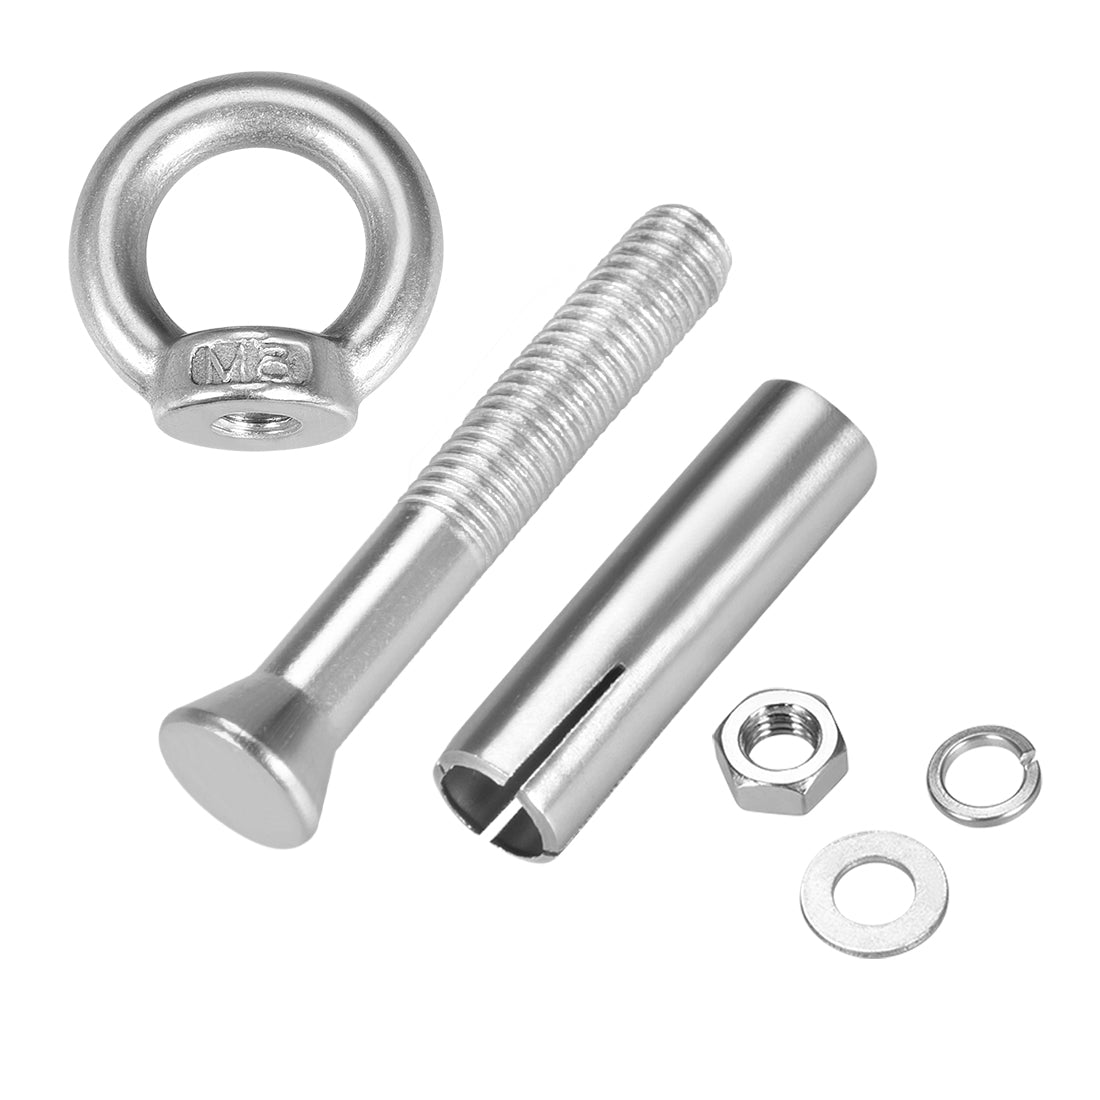 uxcell Uxcell M8 x 80 Expansion Eyebolt Eye Nut Screw with Ring Anchor Raw Bolts 5 Pcs